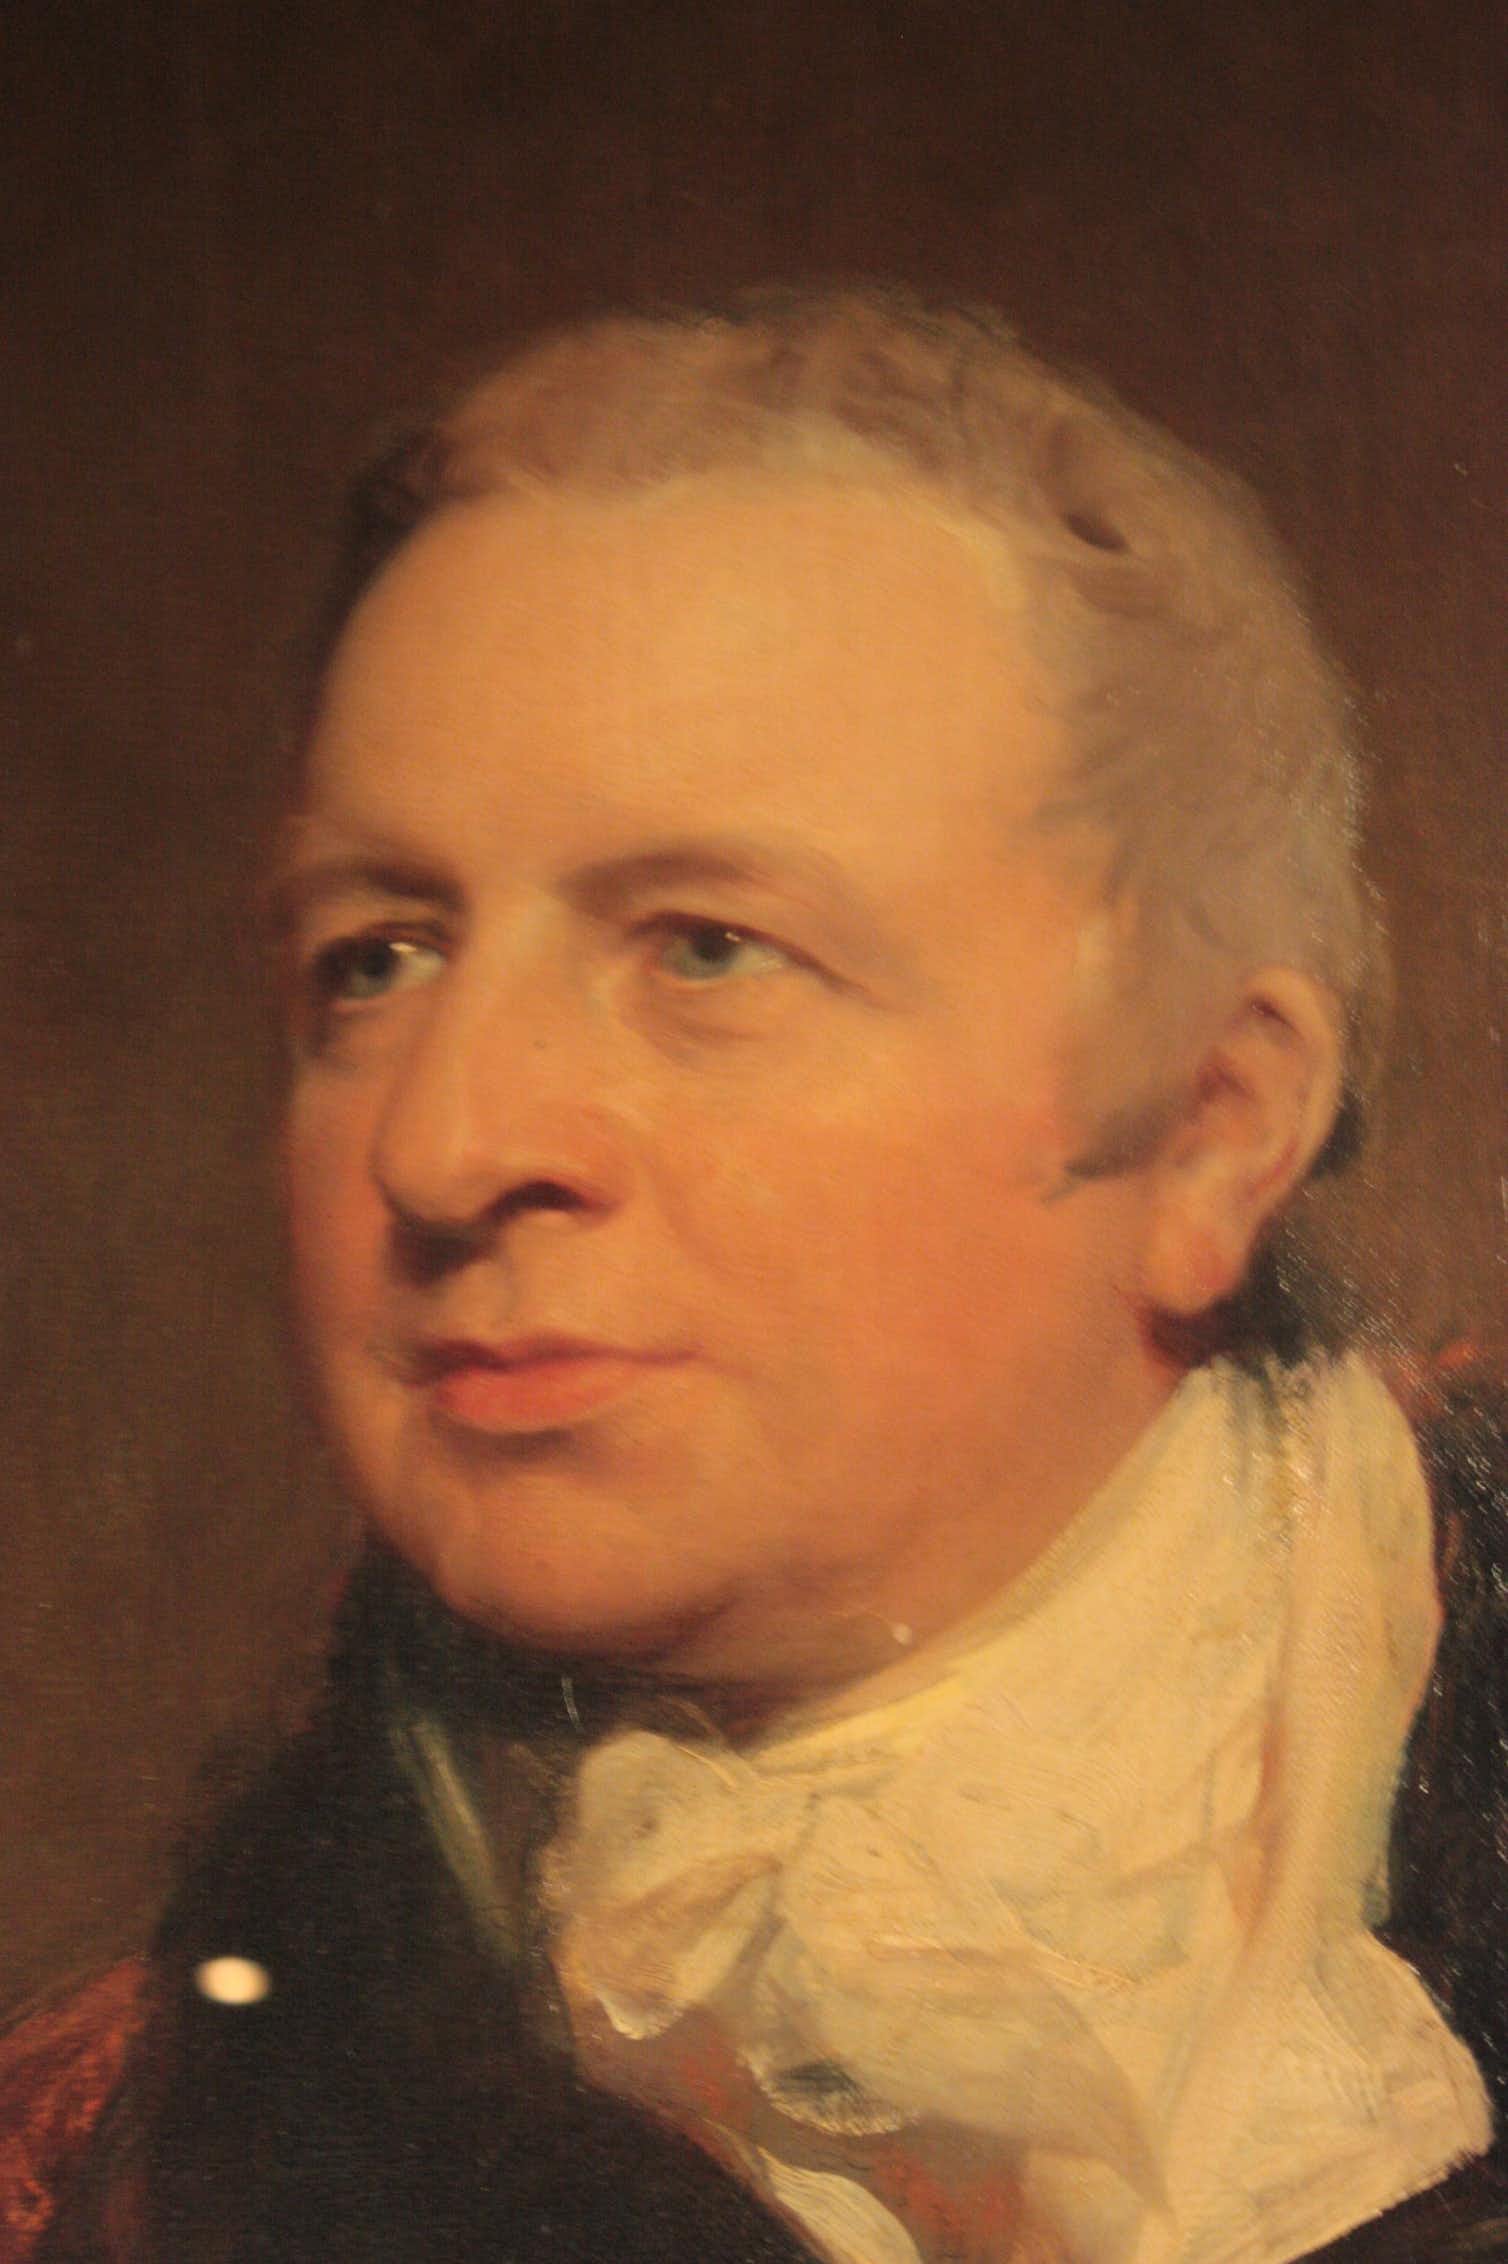 An old painting of a man with blue eyes and short grey hair, wearing a ruffle collared shirt